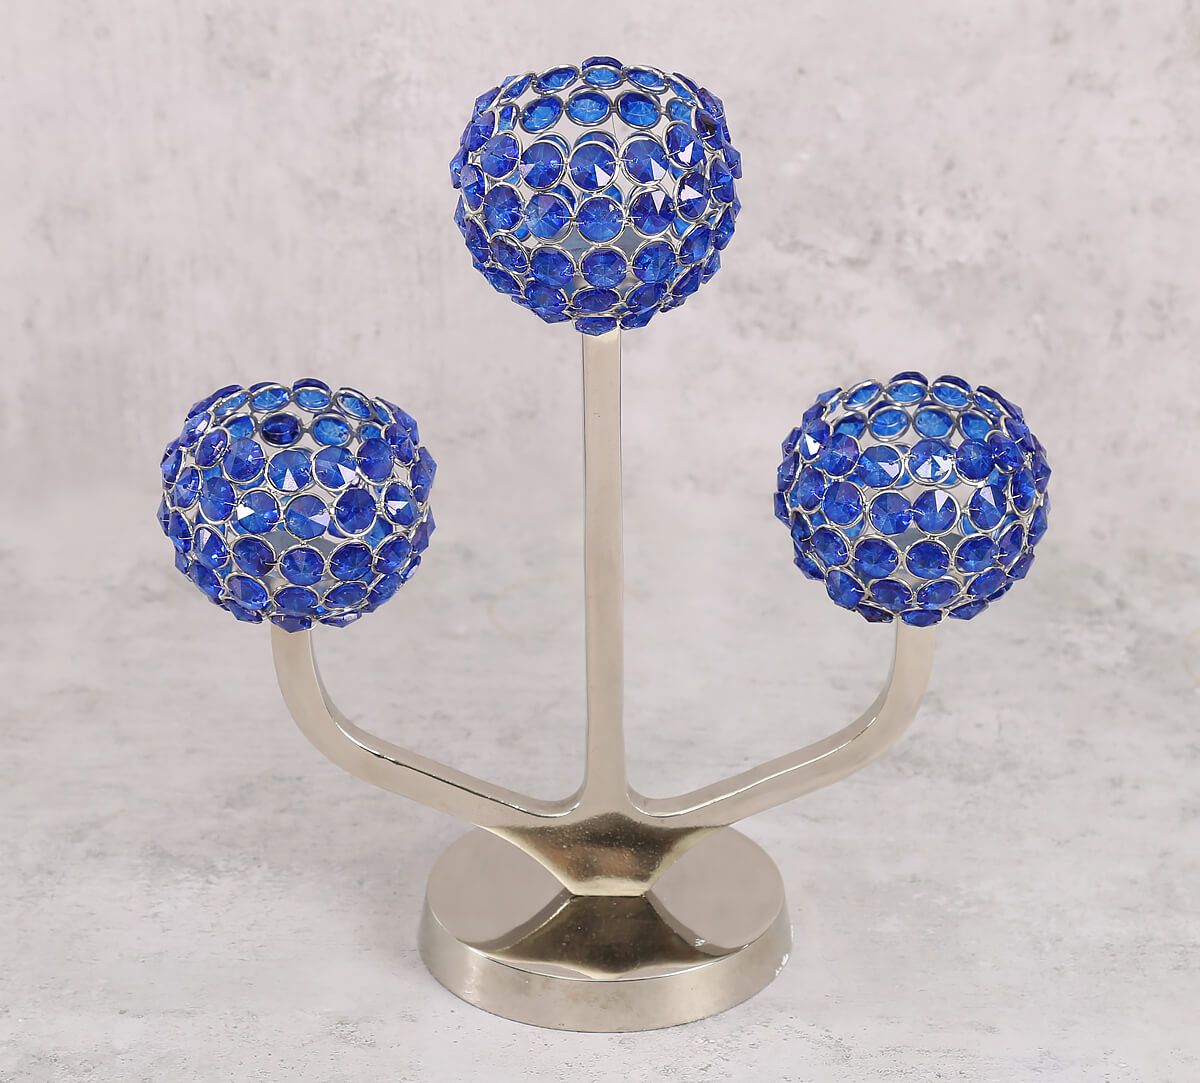 India Circus Blue Globe Crystal Candle Holder